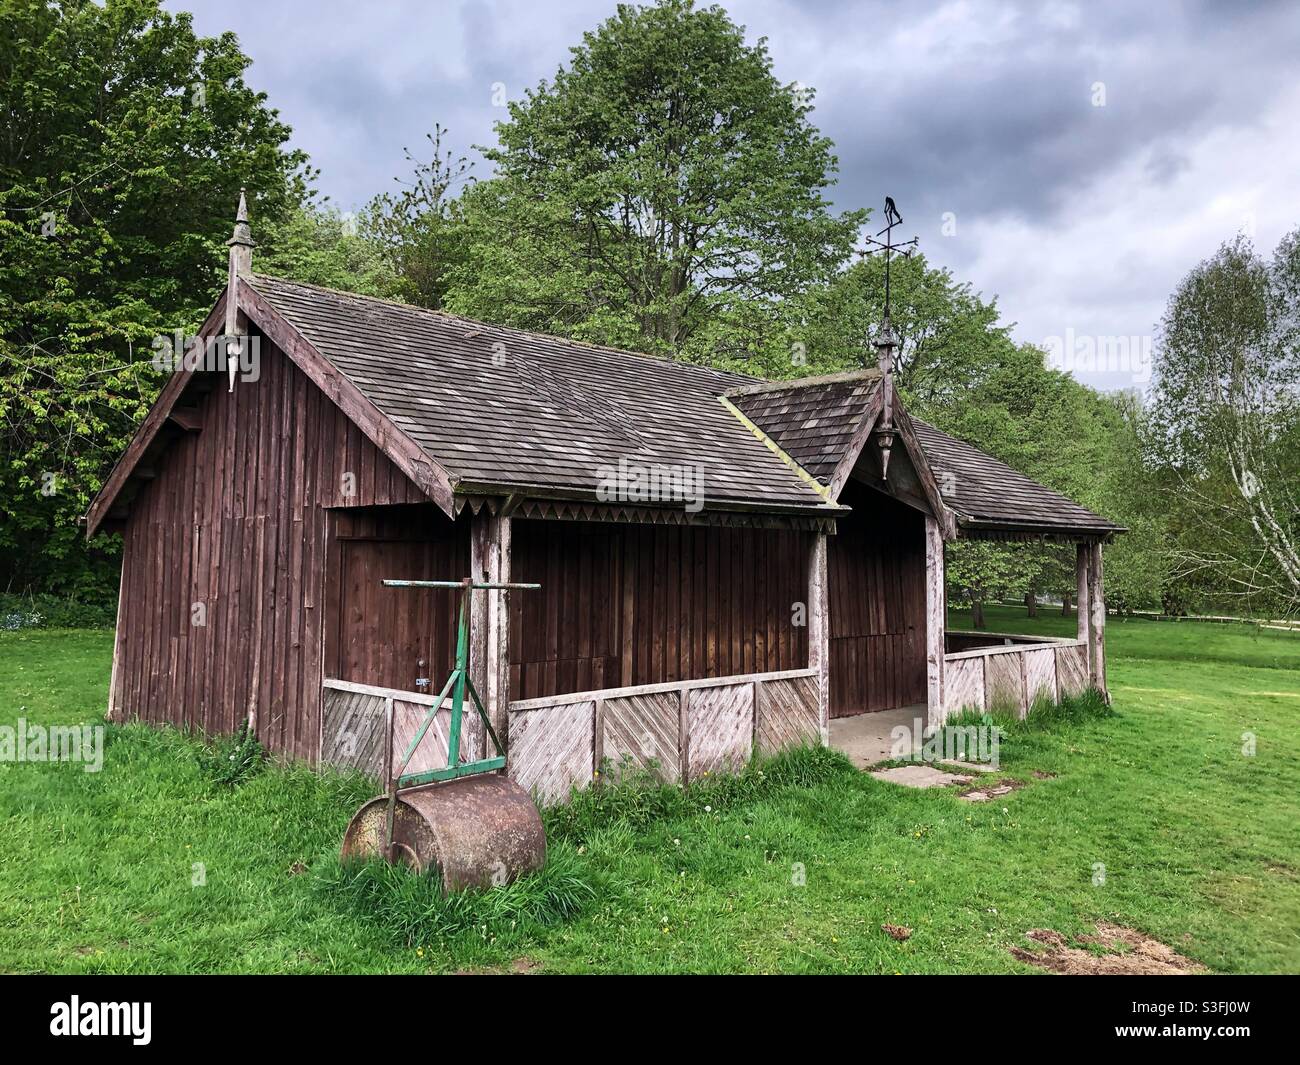 An old wooden cricket pavilion with lawn roller in a traditional English countryside village setting Stock Photo